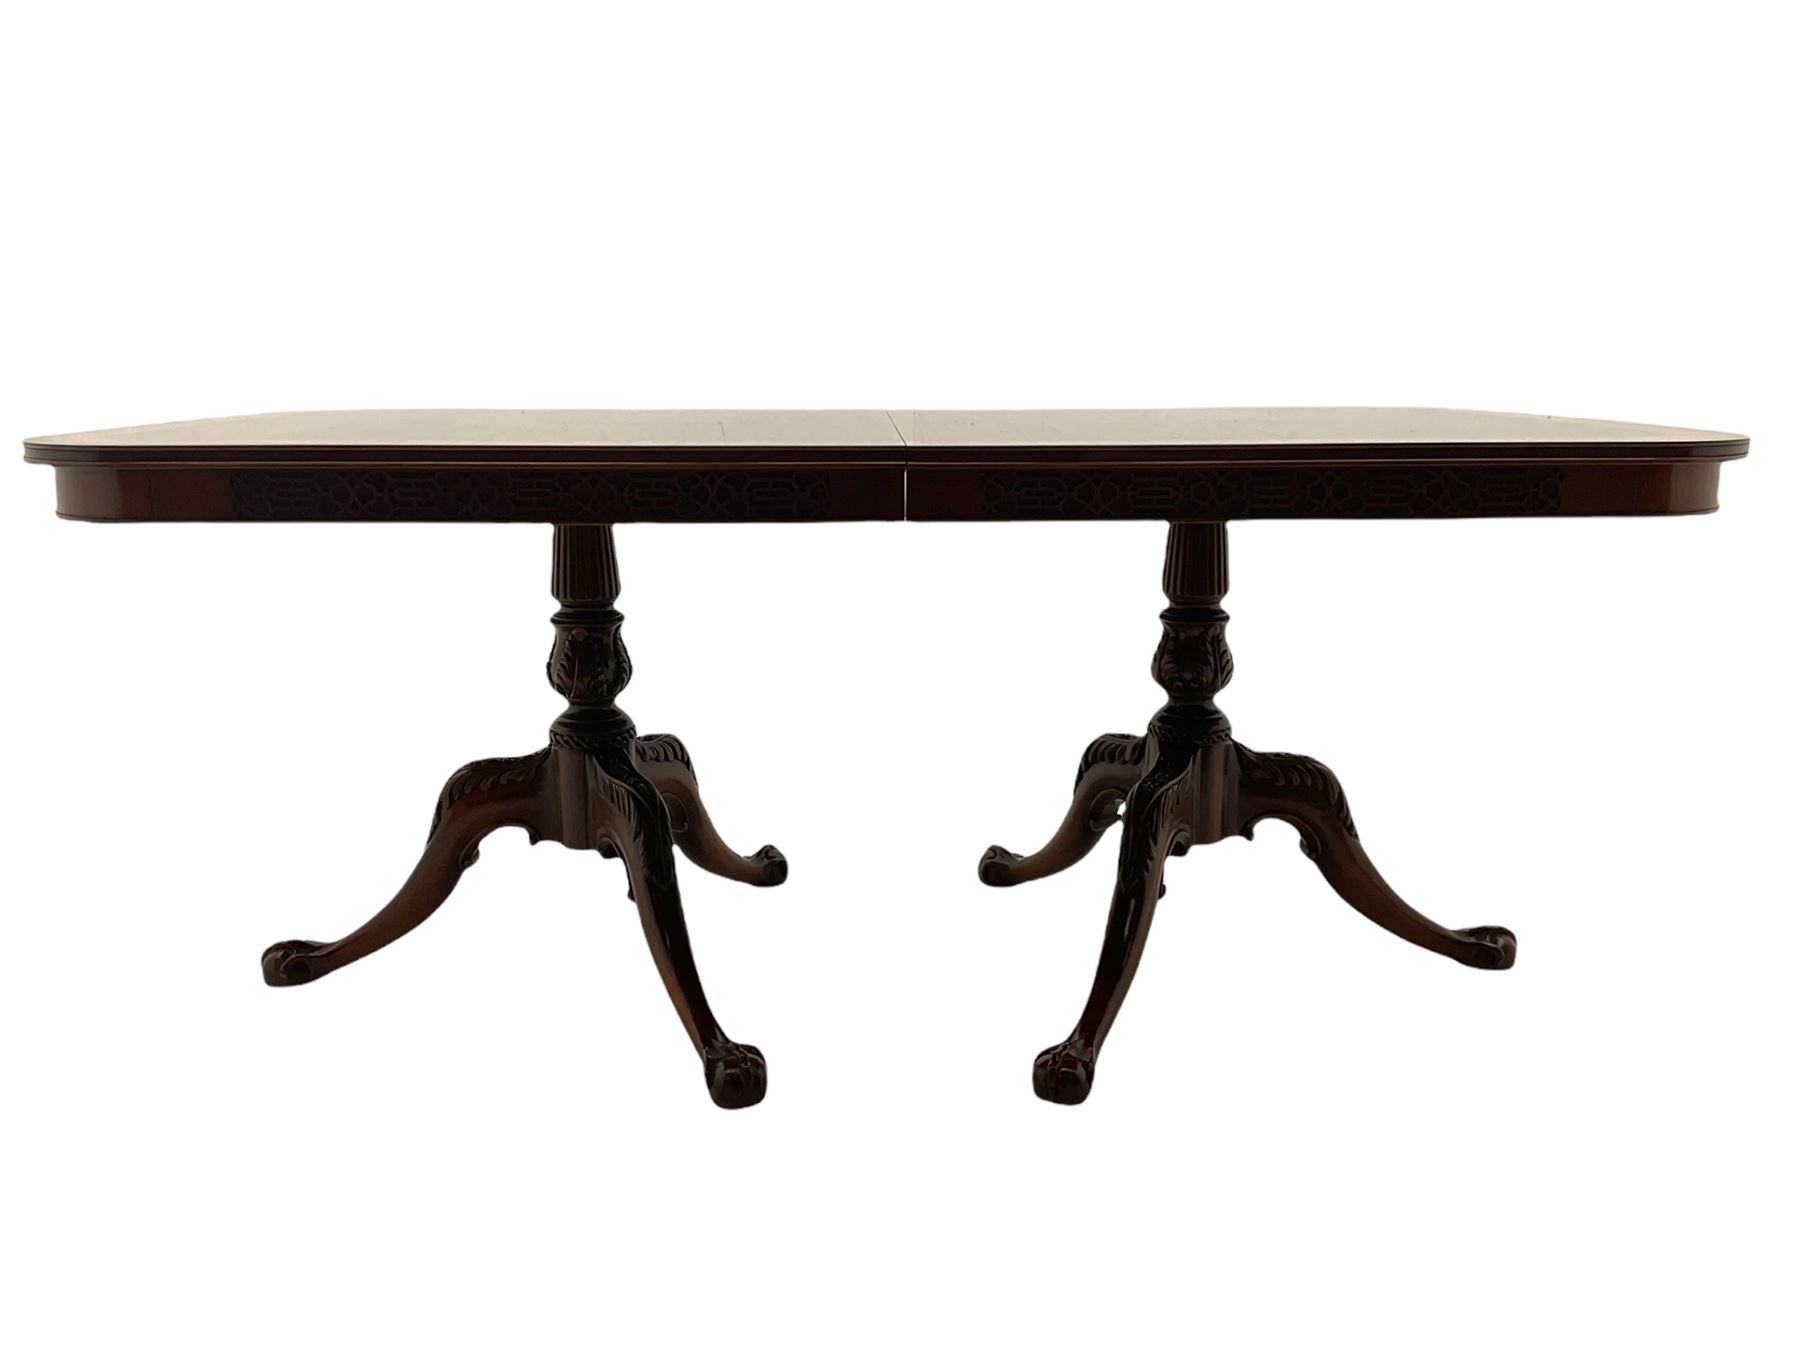 Wade Georgian style mahogany extending dining table with leaf - Image 12 of 27